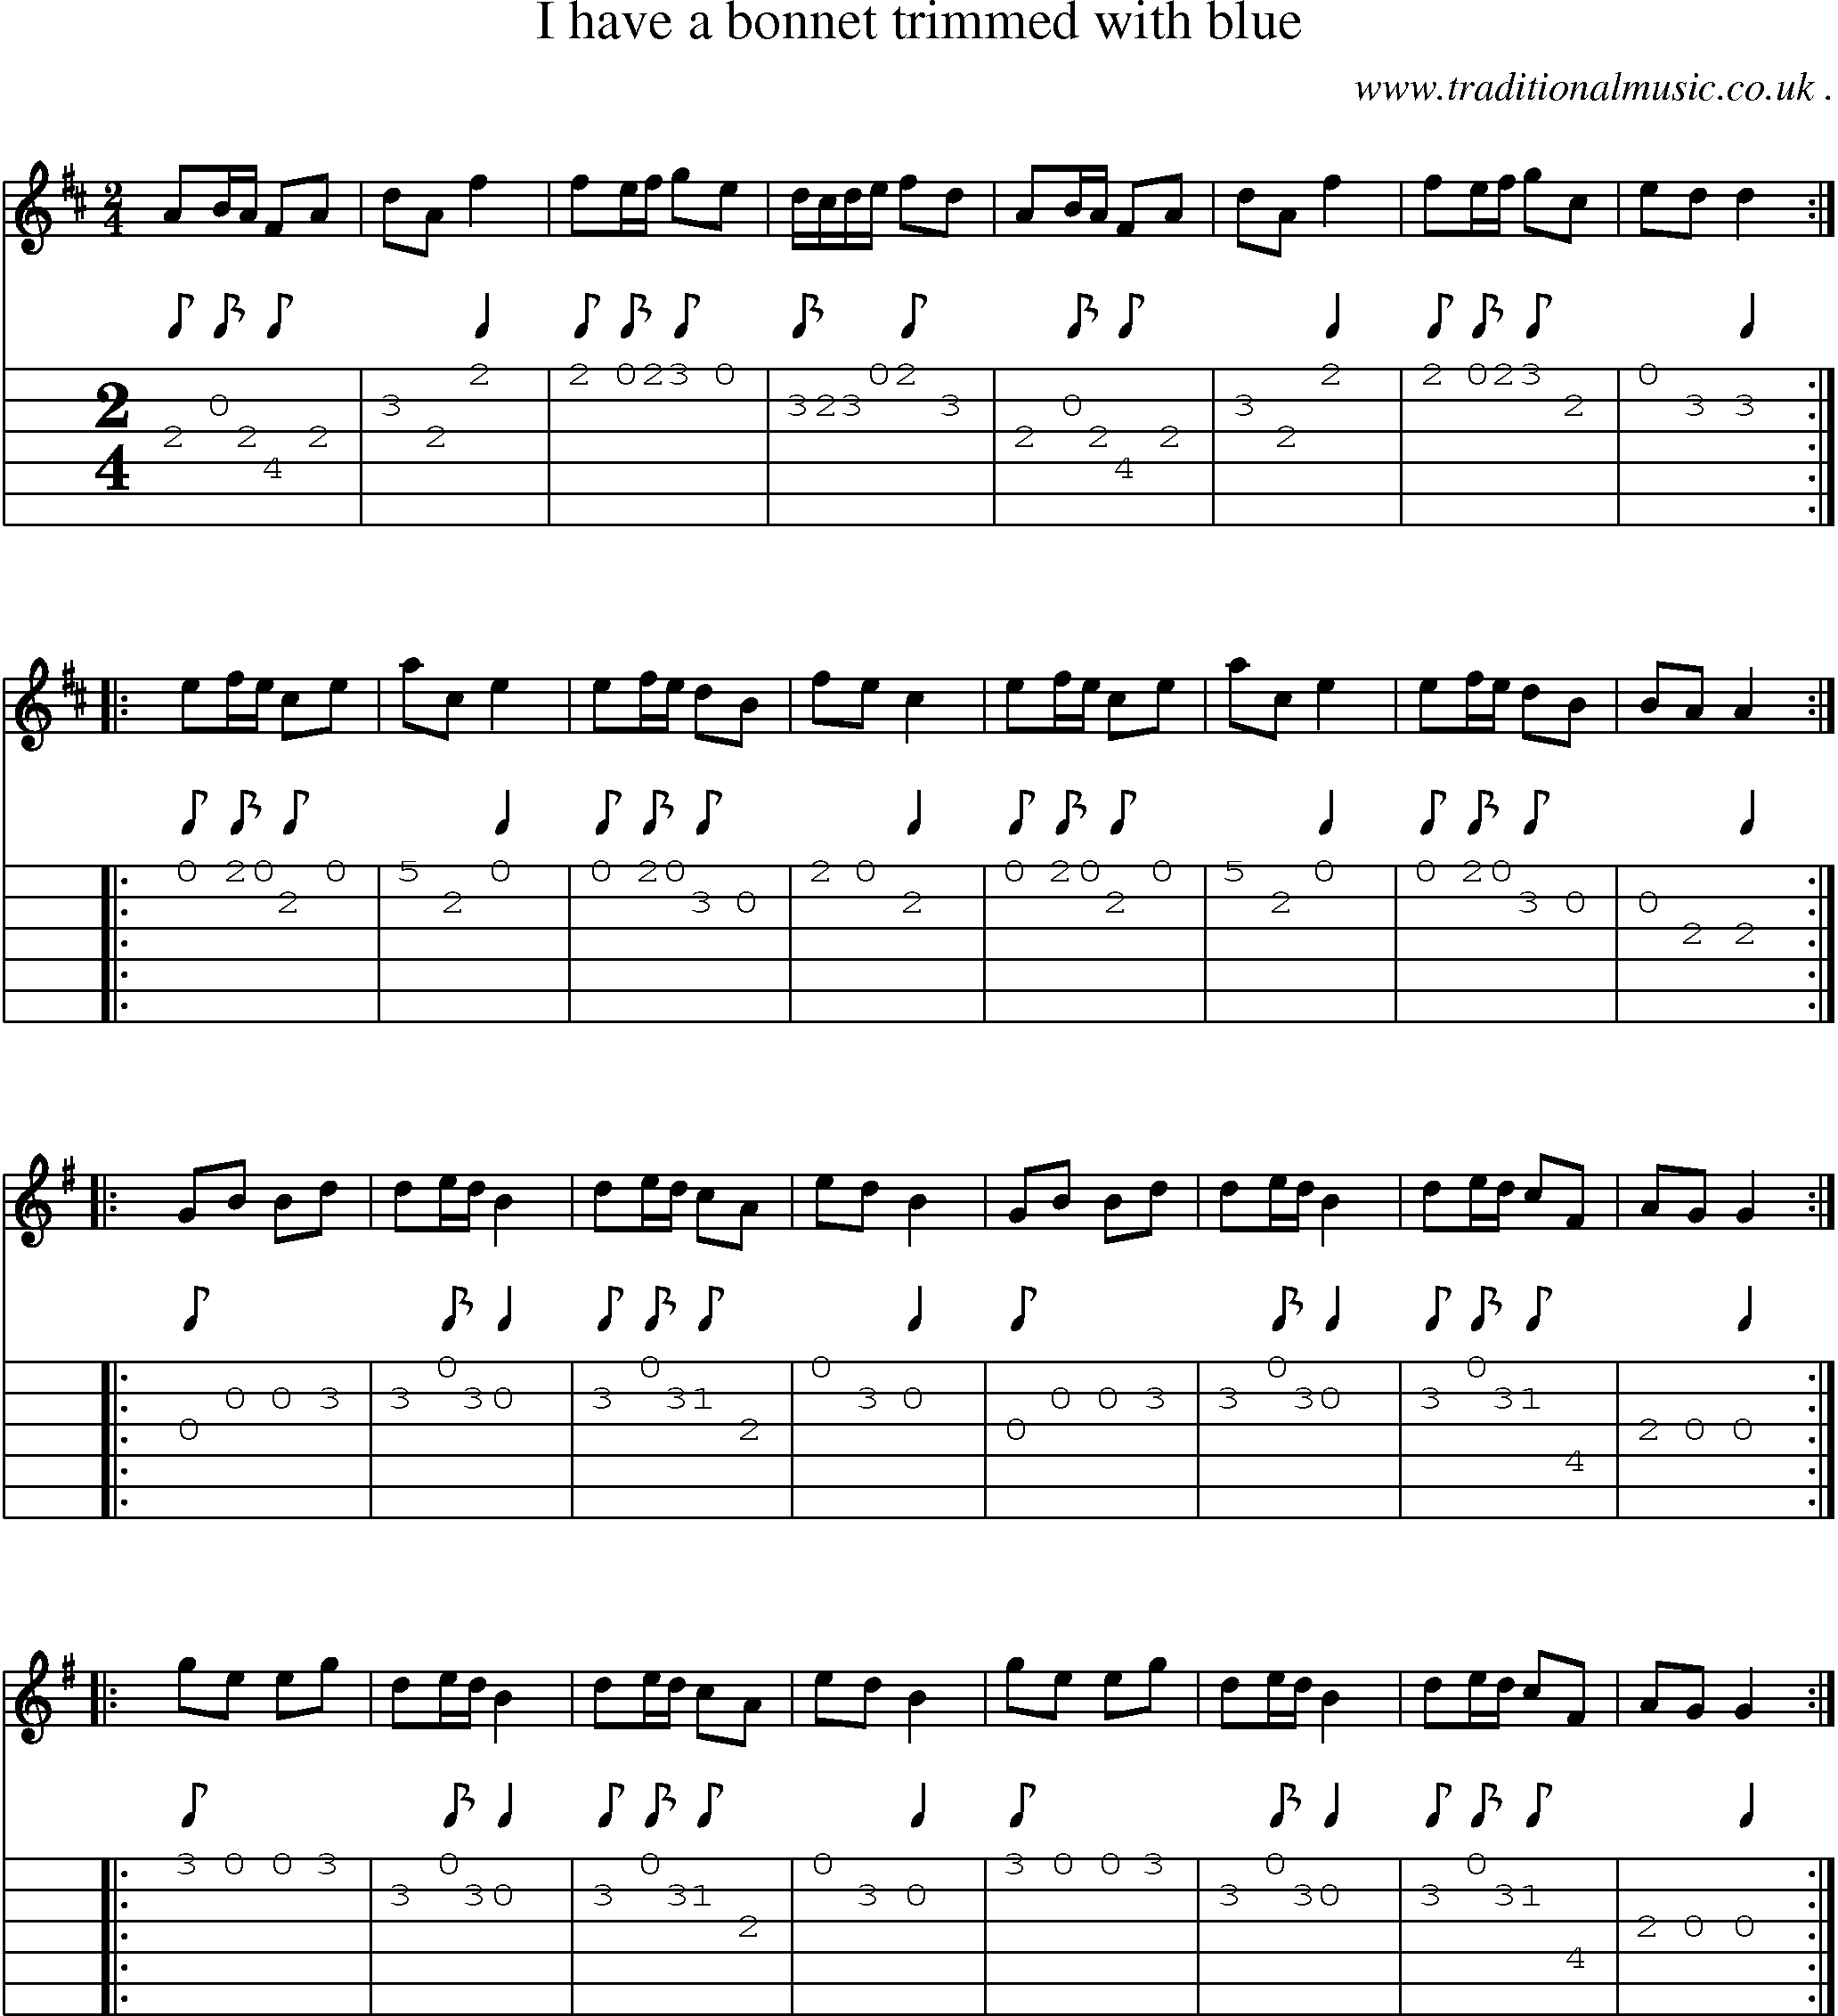 Sheet-music  score, Chords and Guitar Tabs for I Have A Bonnet Trimmed With Blue